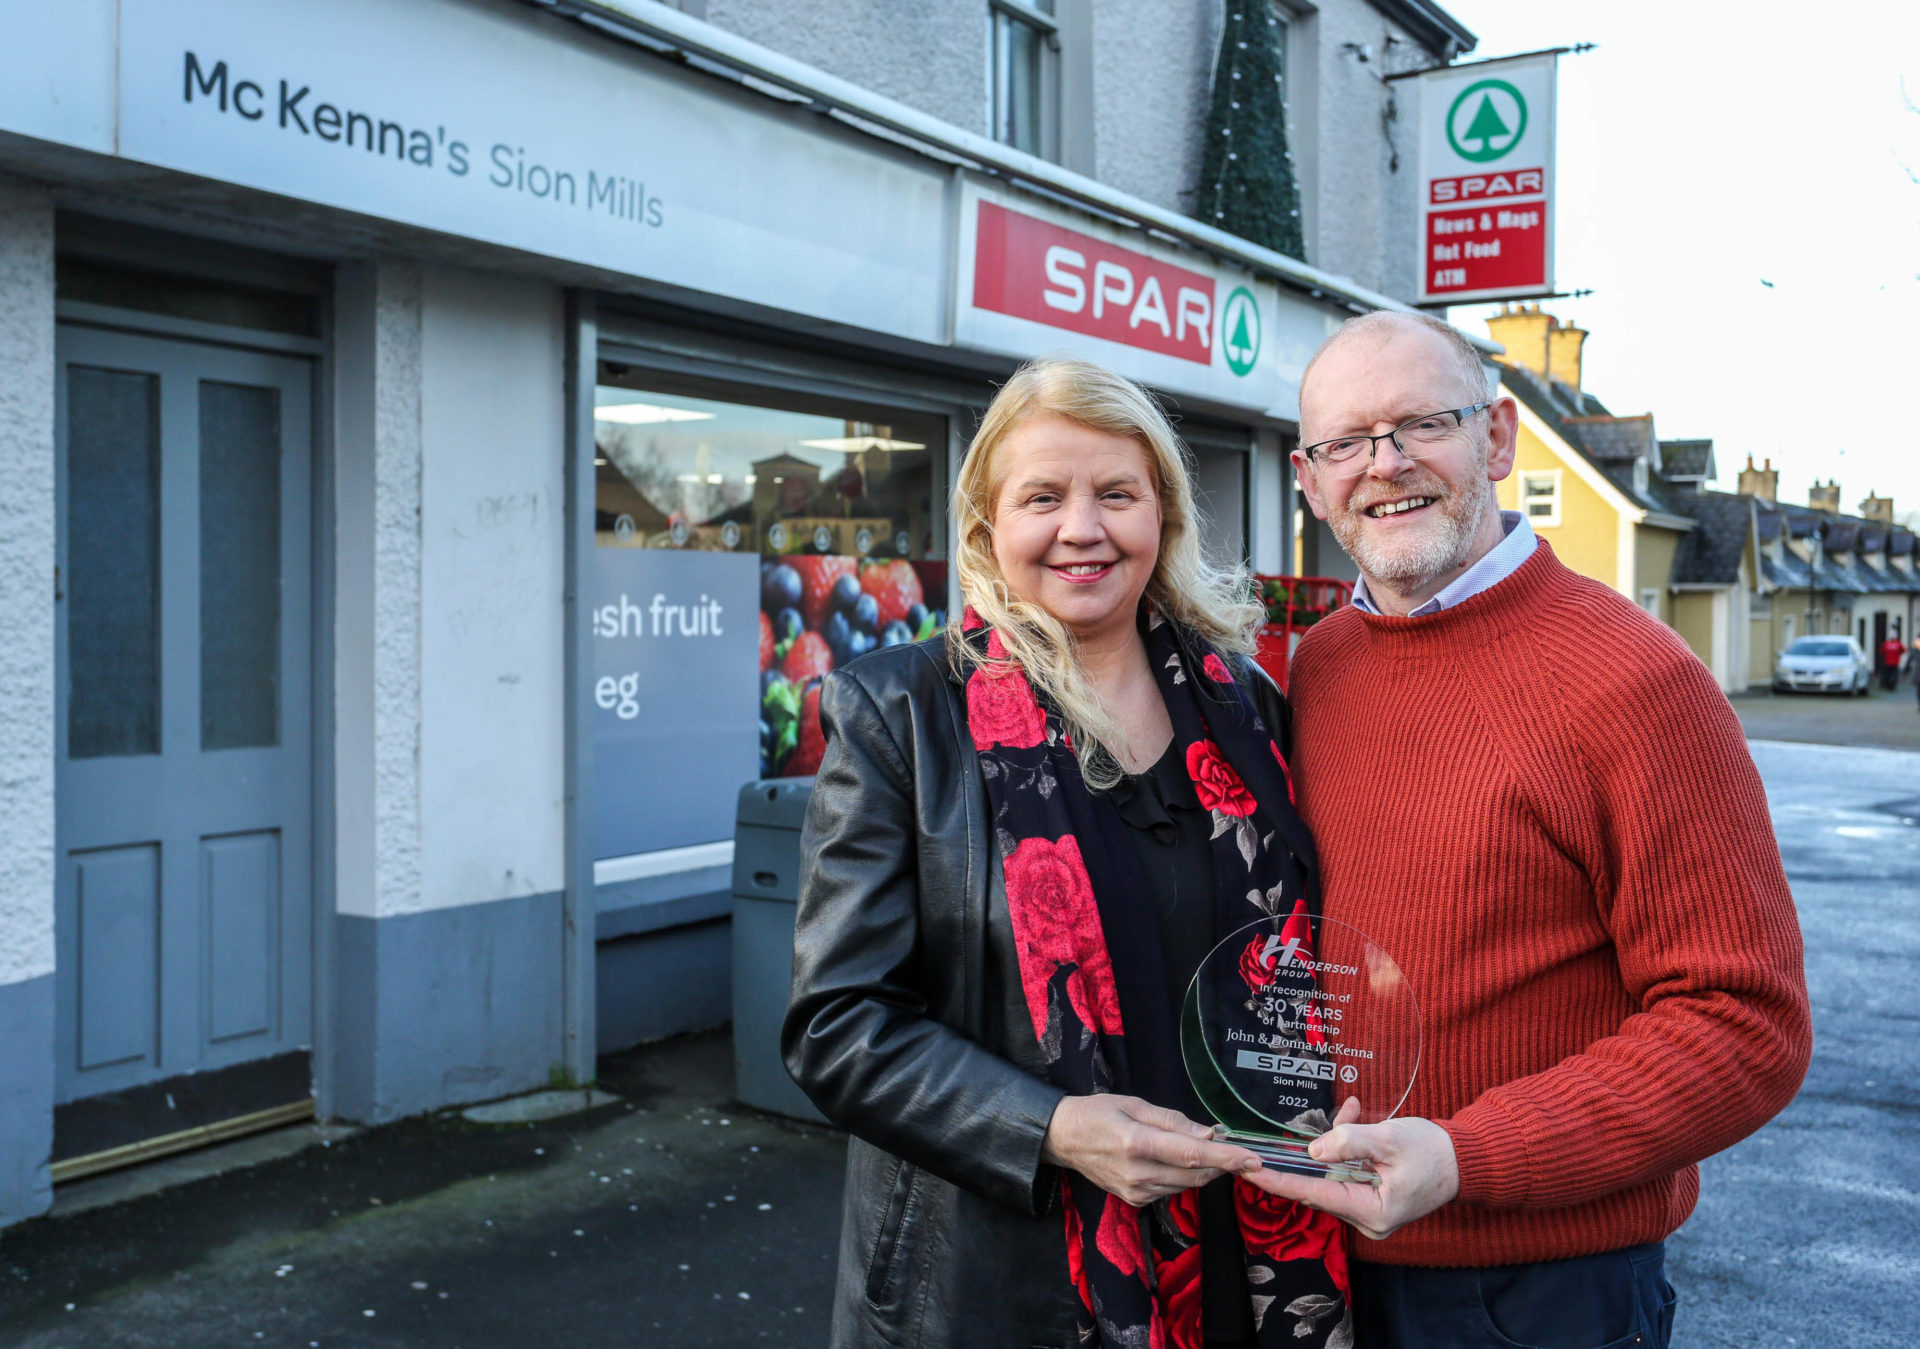 Strabane’s local SPAR kicks off new year with 30th anniversary celebrations